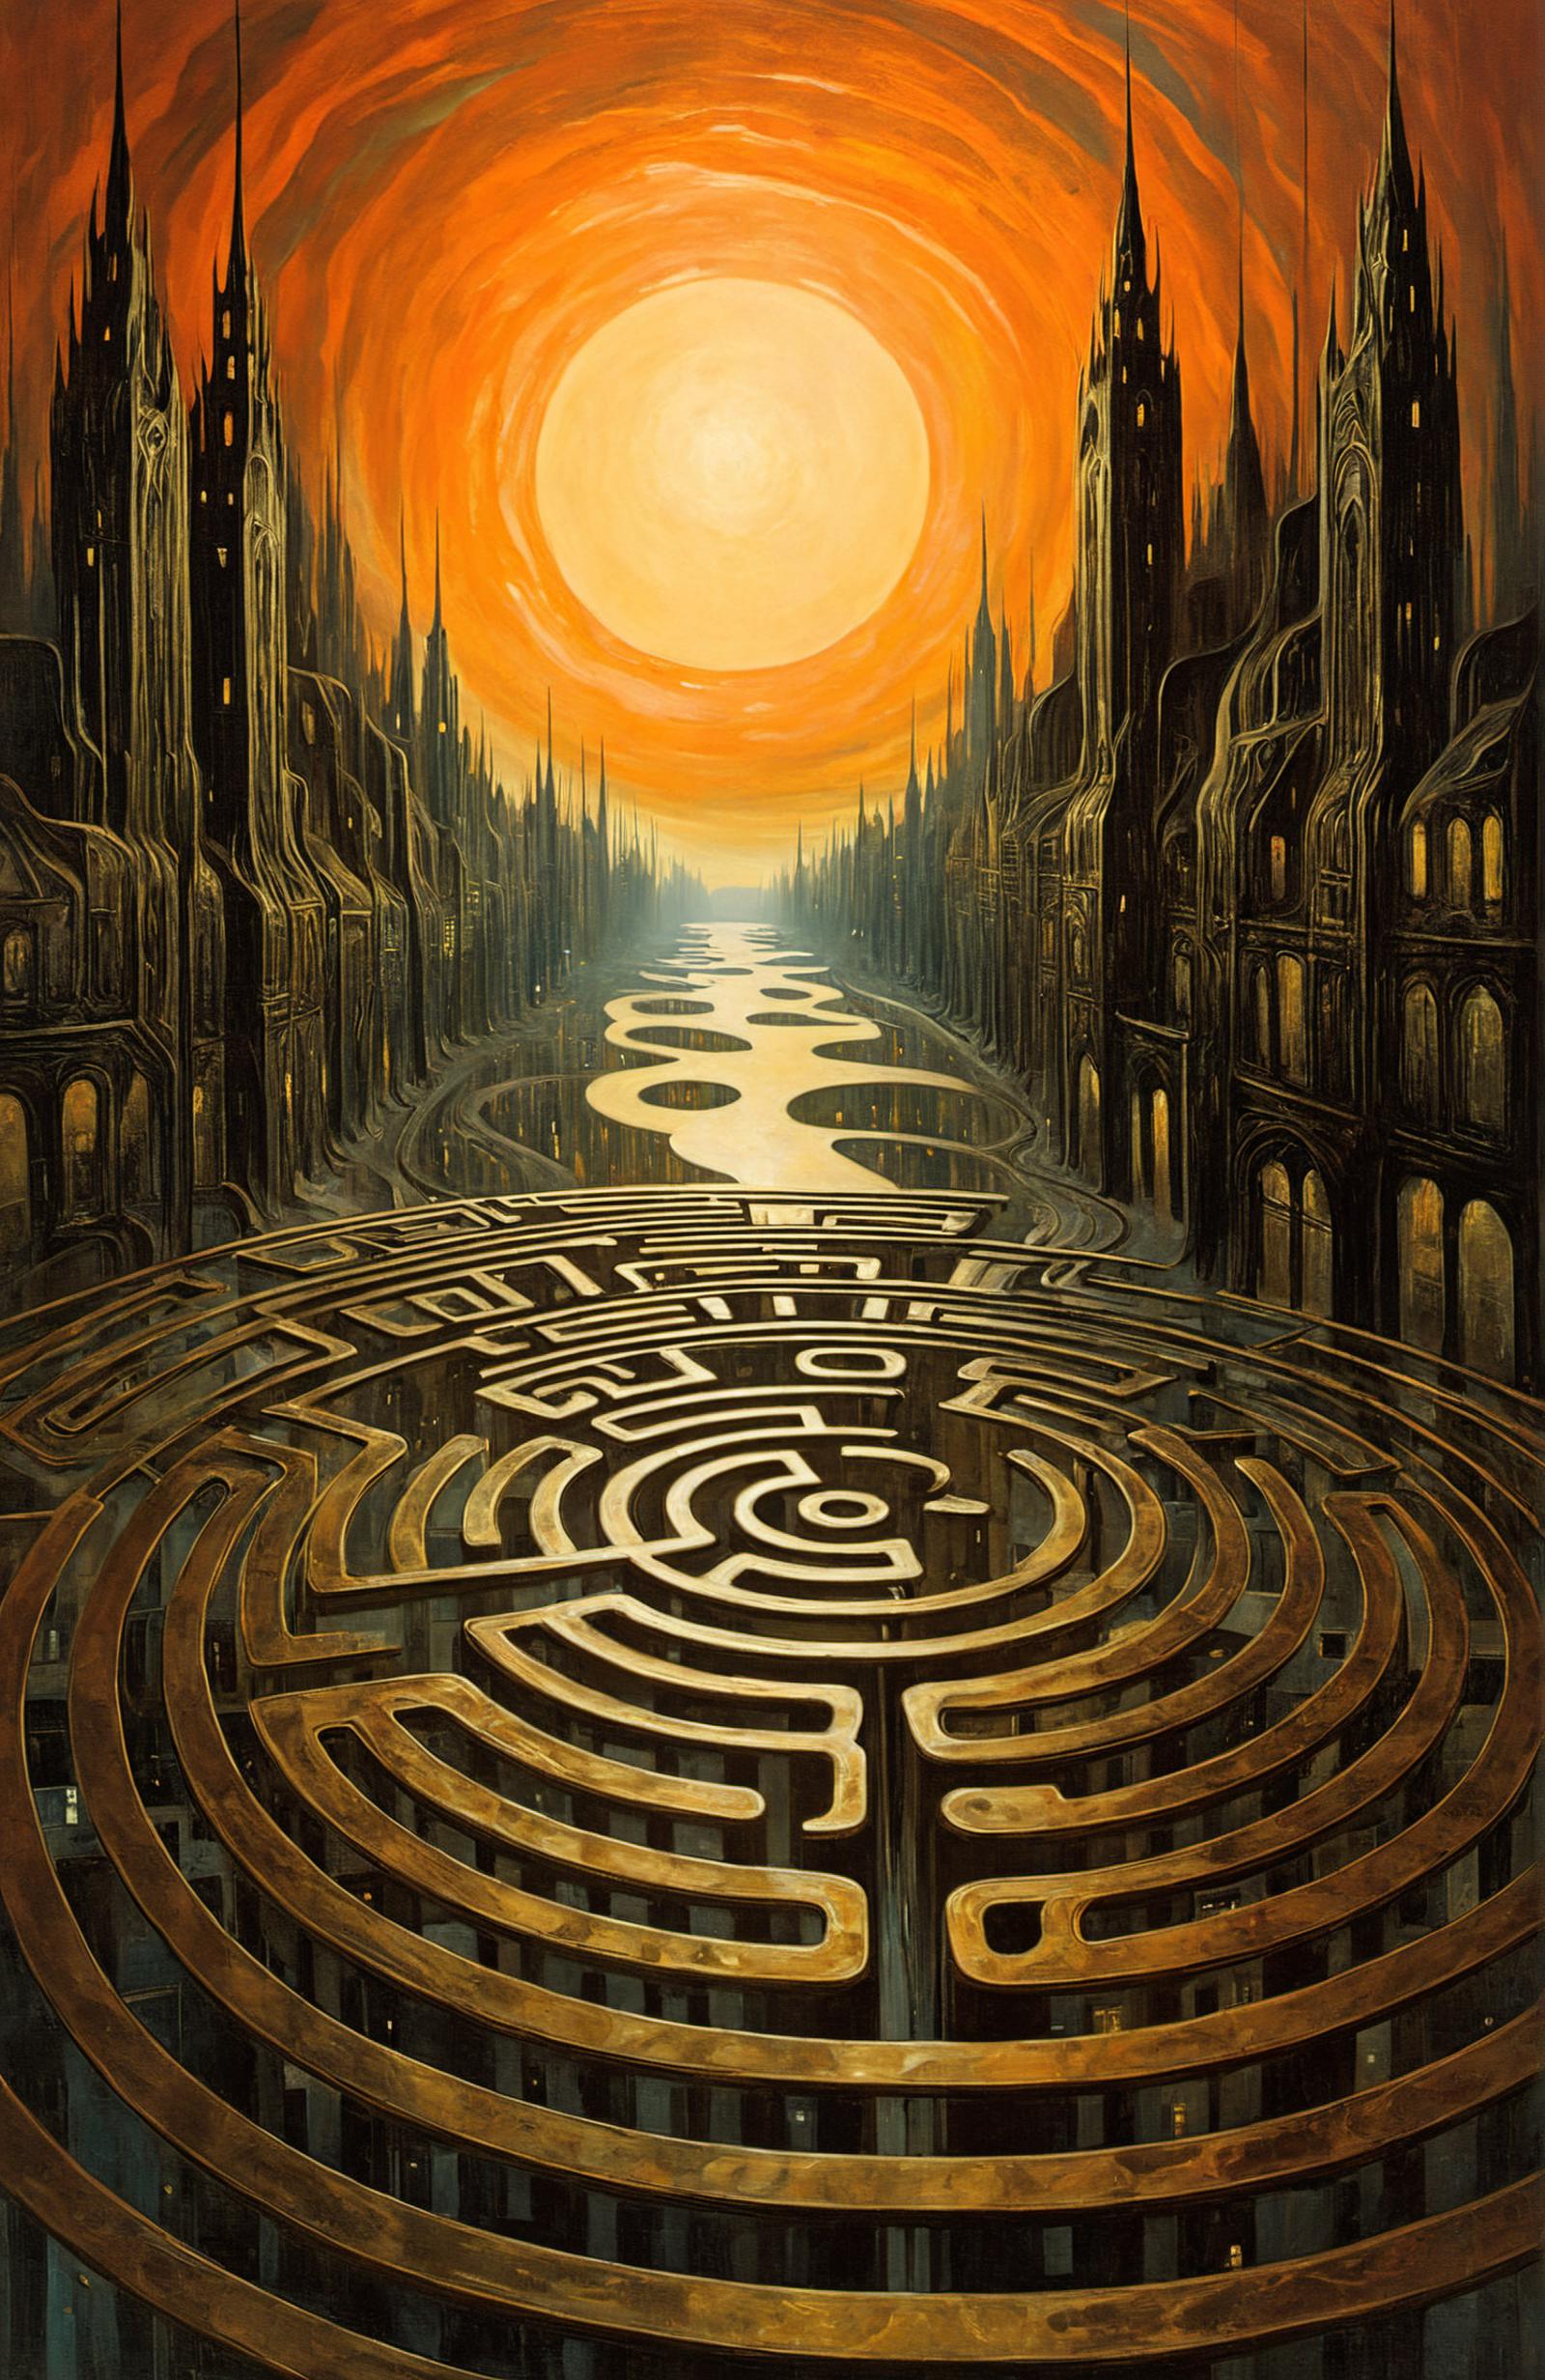 A Maze with a City and Moon in the Background